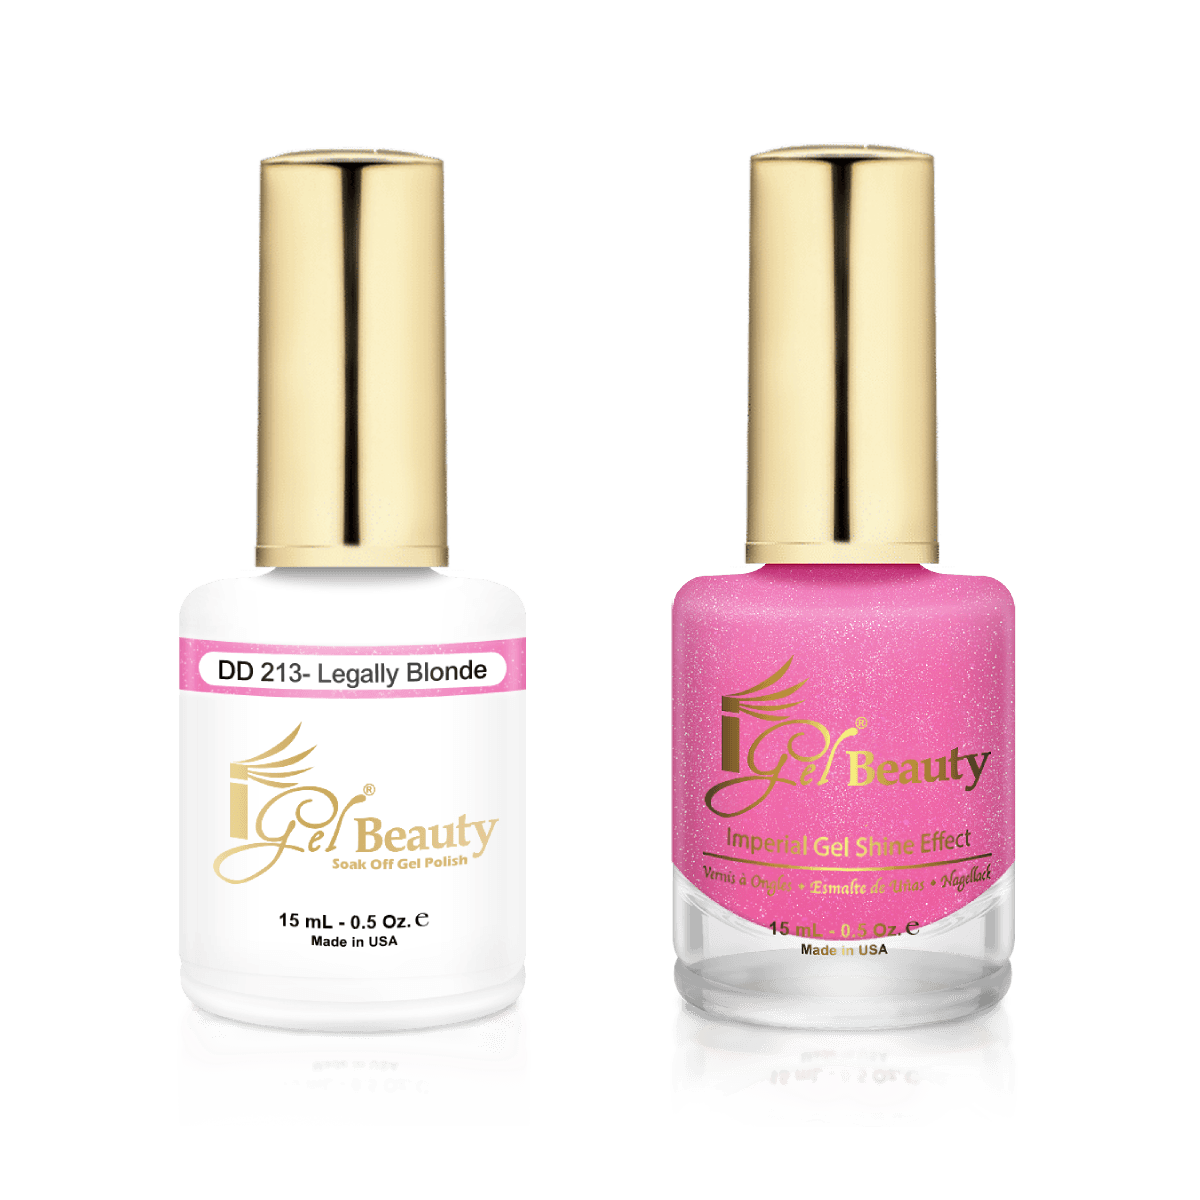 IGel Duo Gel Polish + Matching Nail Lacquer DD 213 LEGALLY BLOND